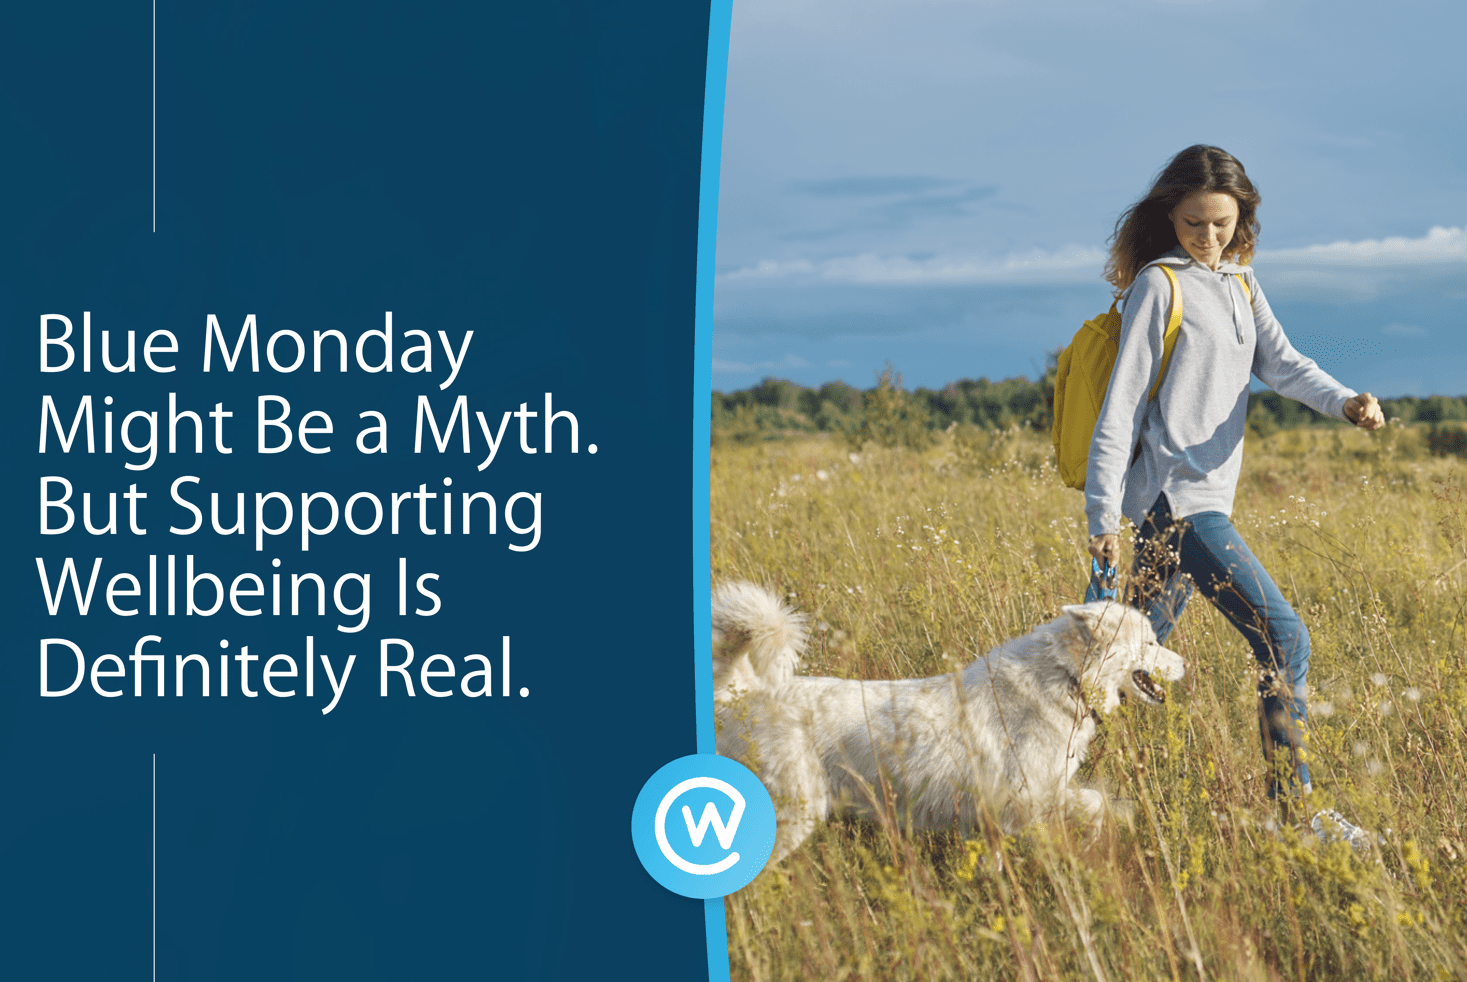 Blue Monday might be a myth. But supporting wellbeing is definitely real.